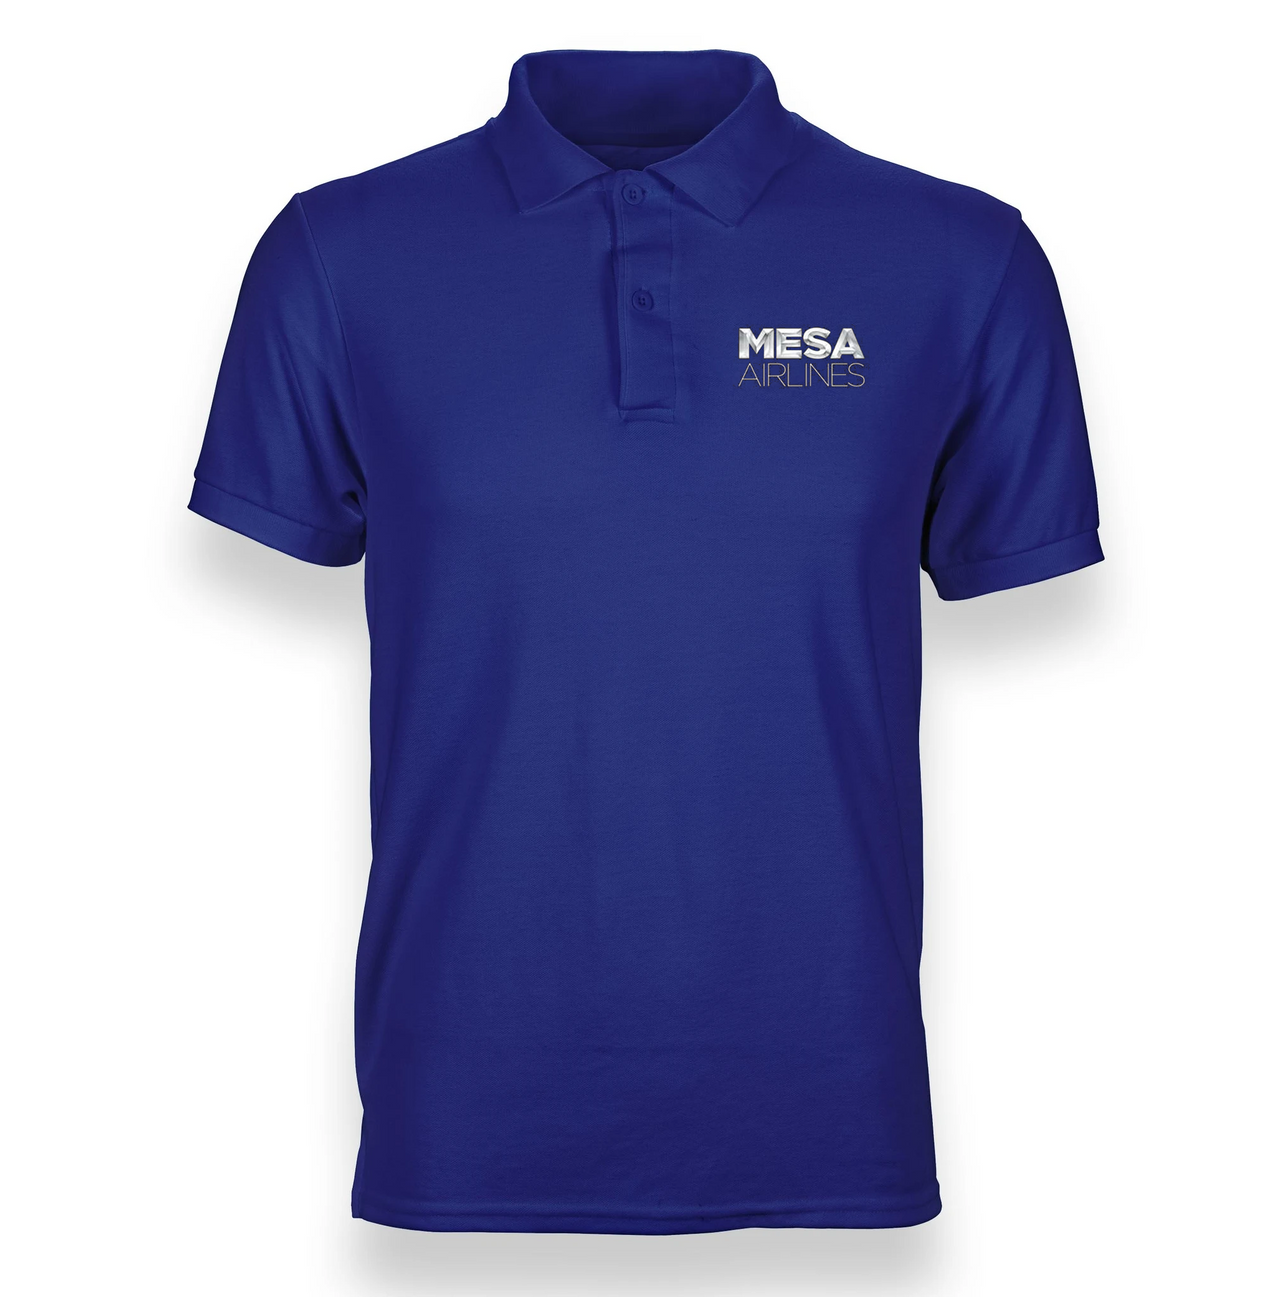 MESA AIRLINES POLO T-SHIRT